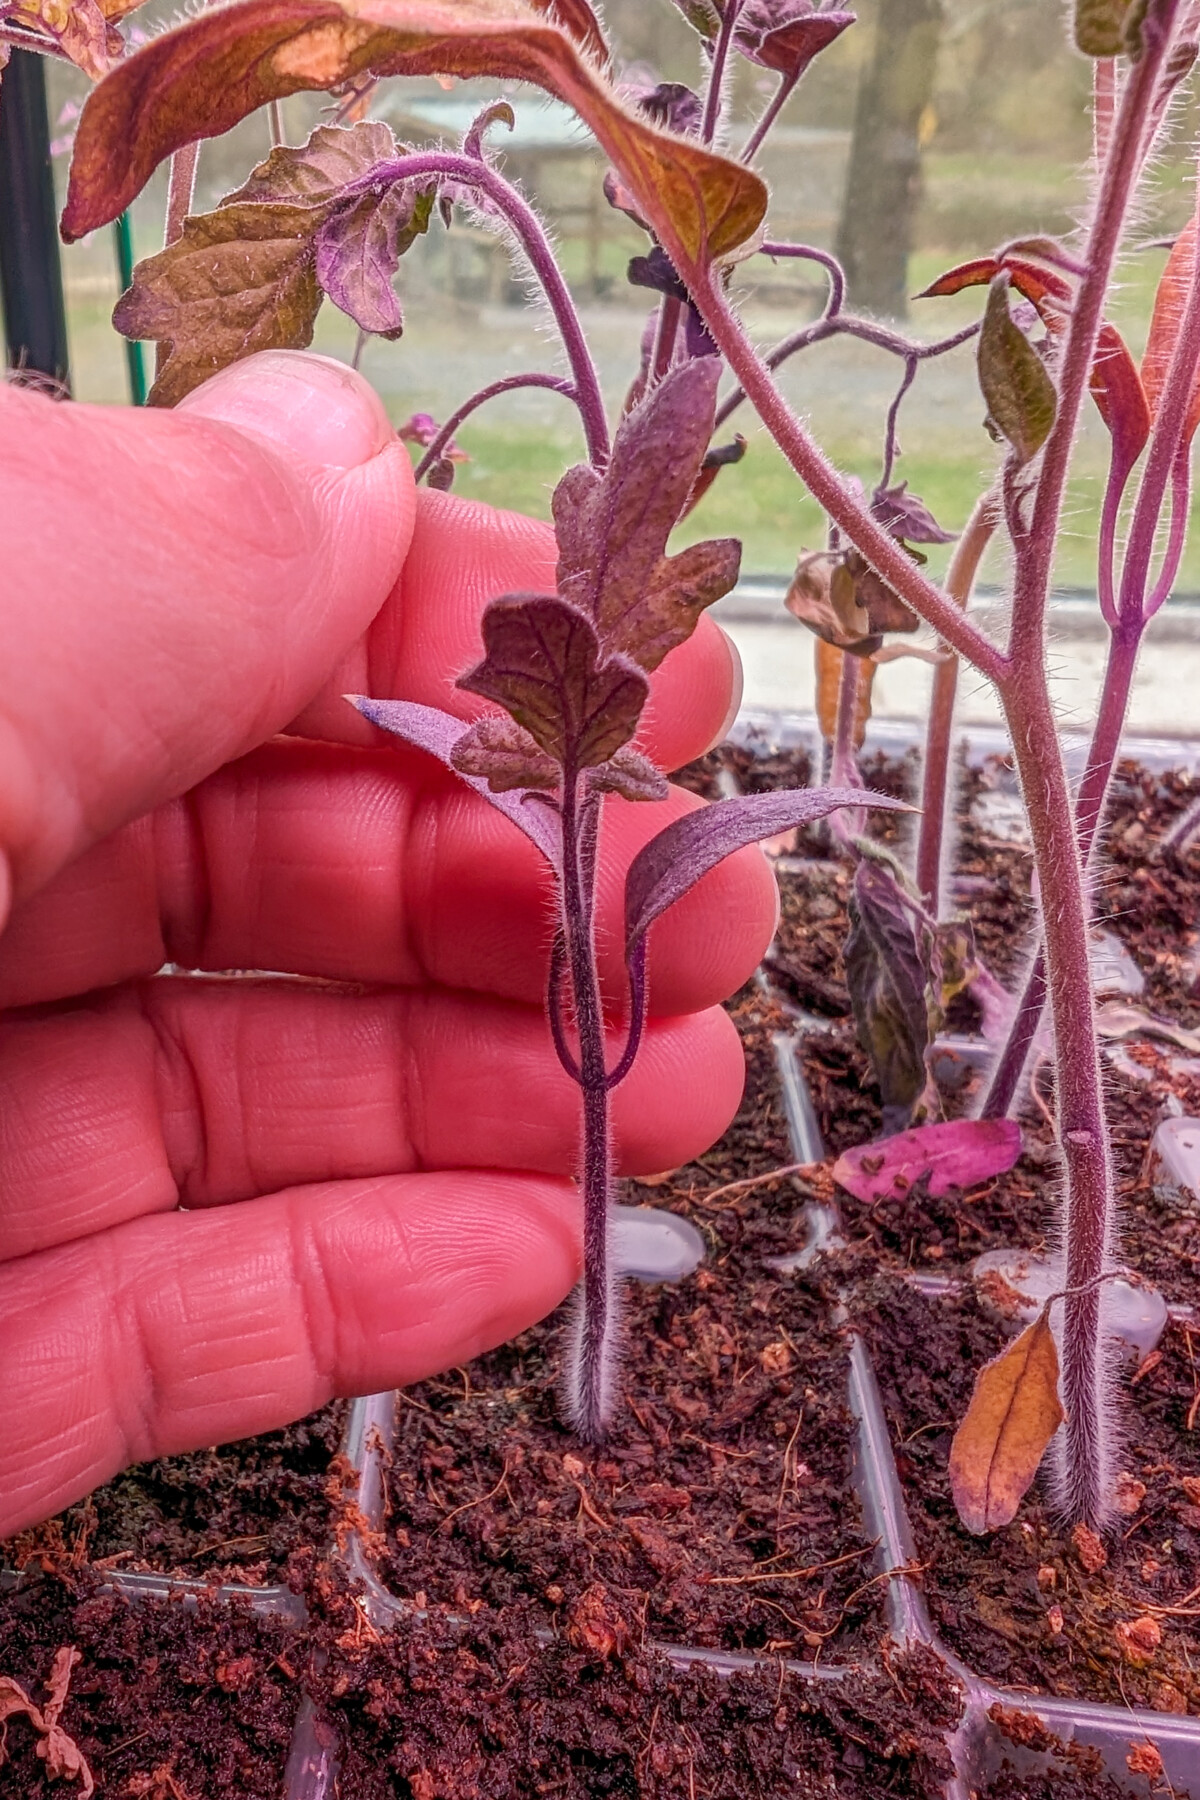 Finger holding a small purple tomato seedling